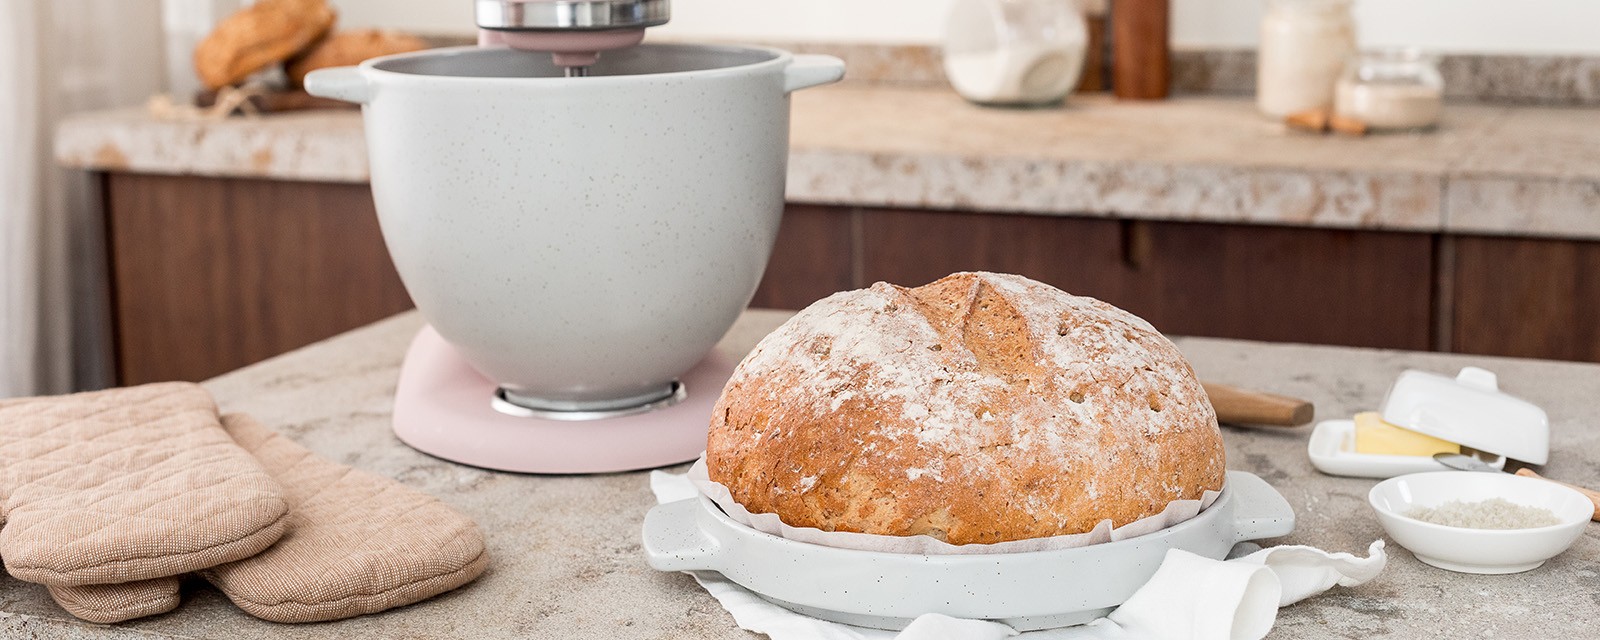 Sourdough Bread in a Stand Mixer: Recipe and Tips